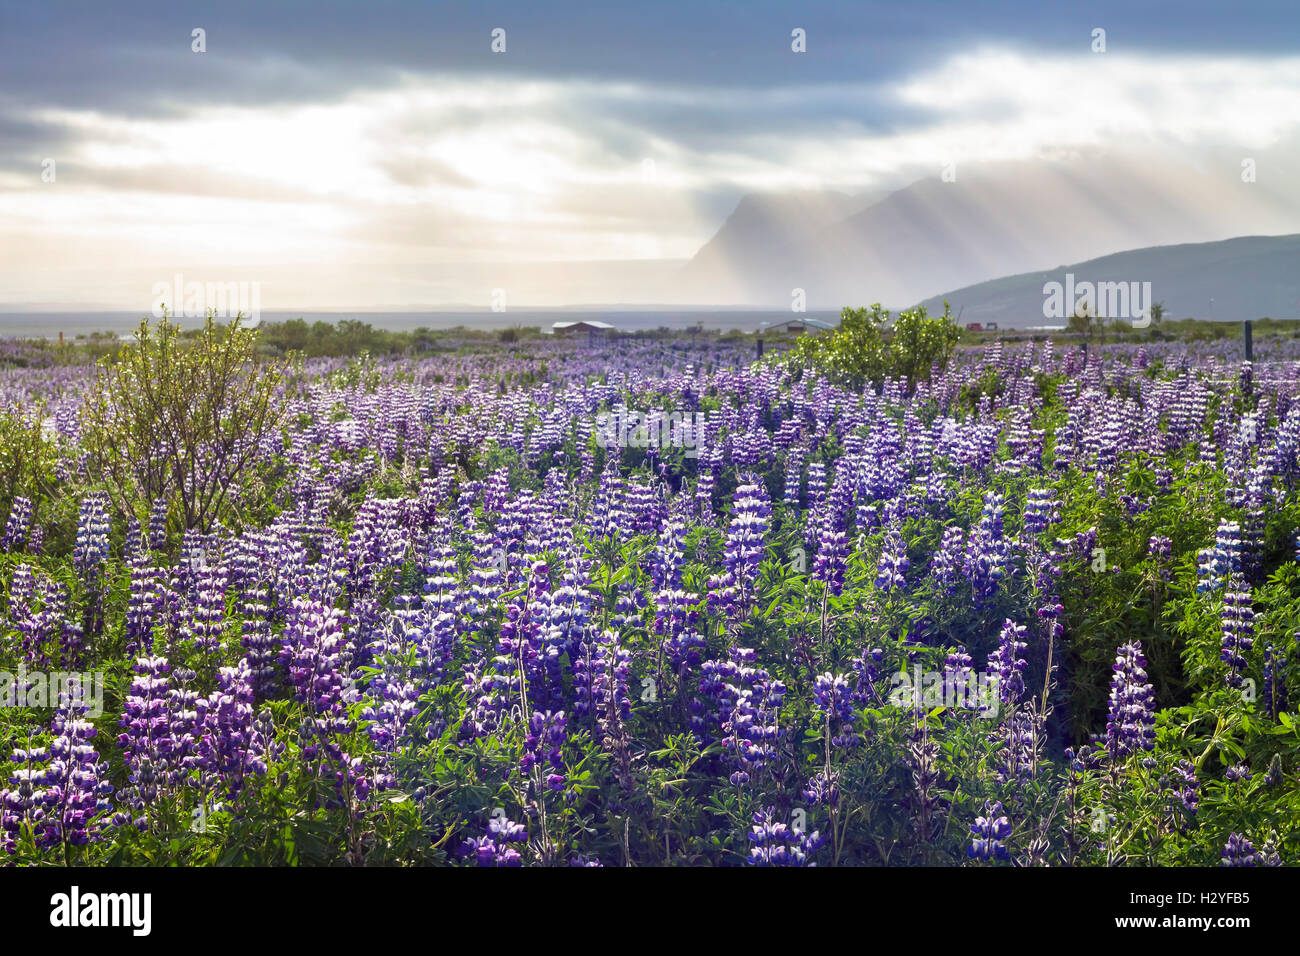 Wild nature landscape of South Iceland with purple lupin flowers and dramatic view of mountains Stock Photo